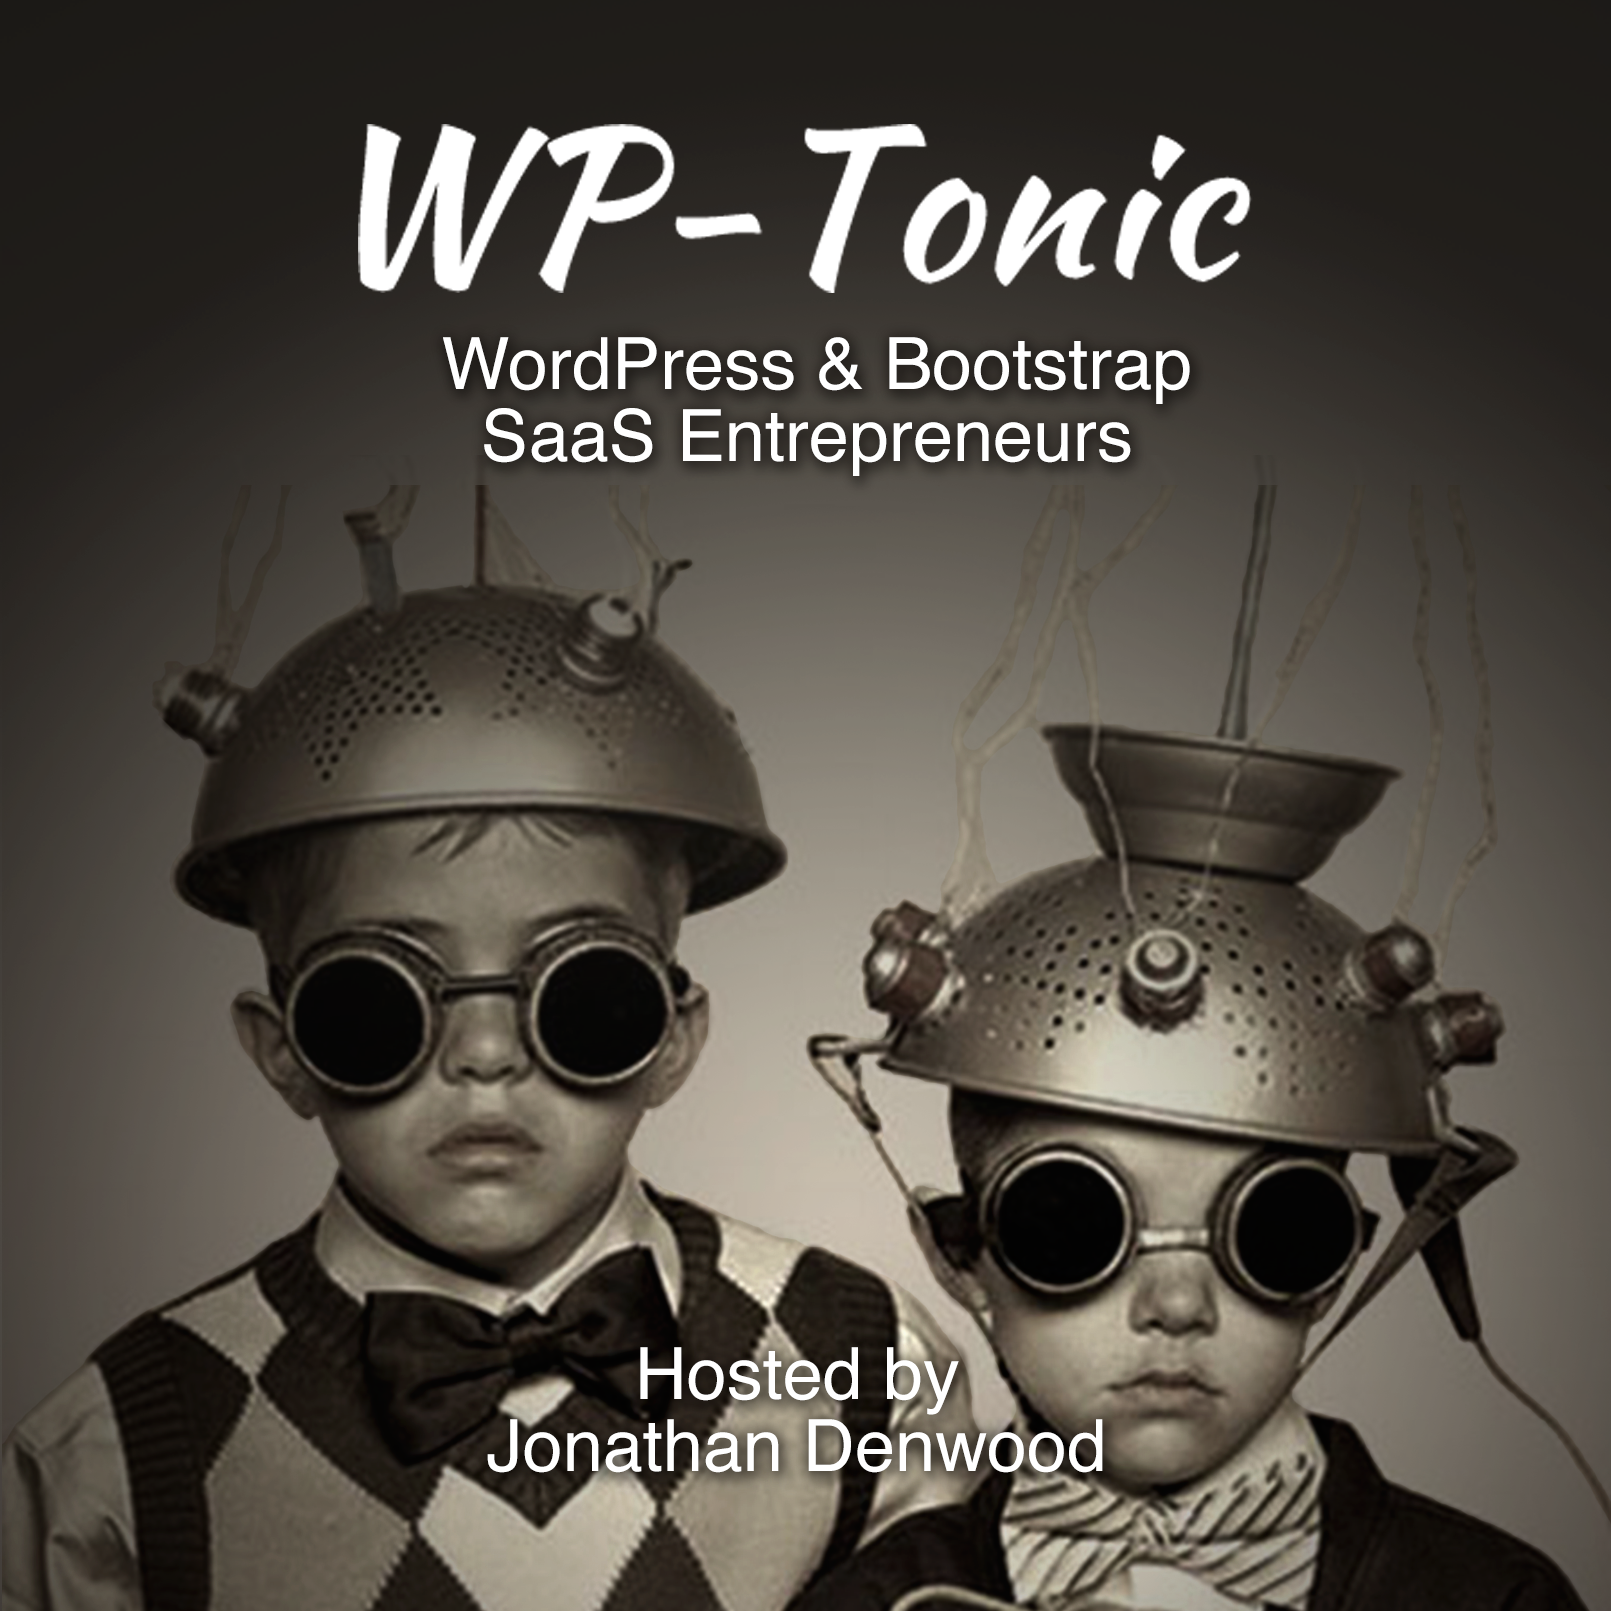 #479 WP-Tonic Round-Table Show on Friday 20th of March, 2020 at 8:30am PST